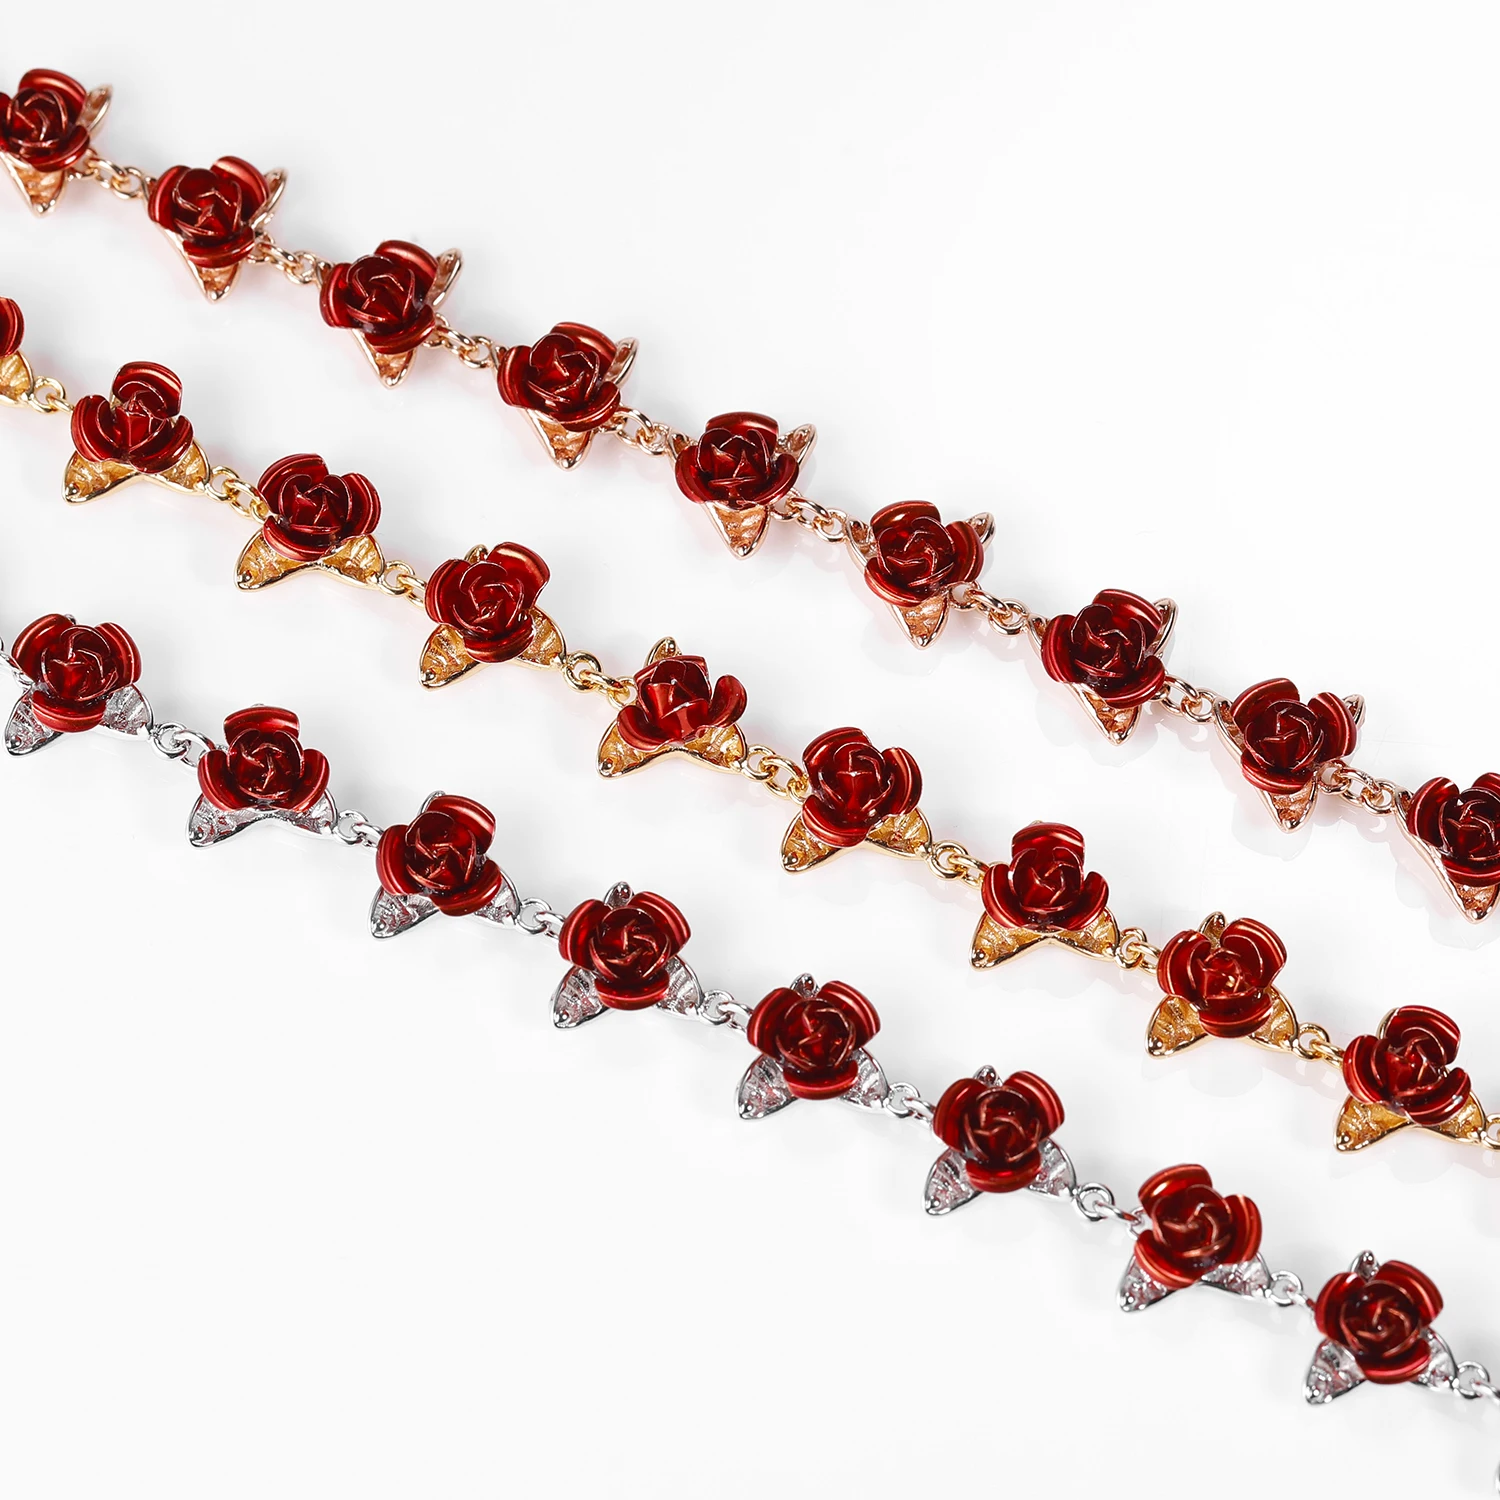 Red Rose Flowers Bracelet Femme Wrist Charm Chain Gold Color Fashion Jewelry Bracelets for Women Mother's Day Gifts